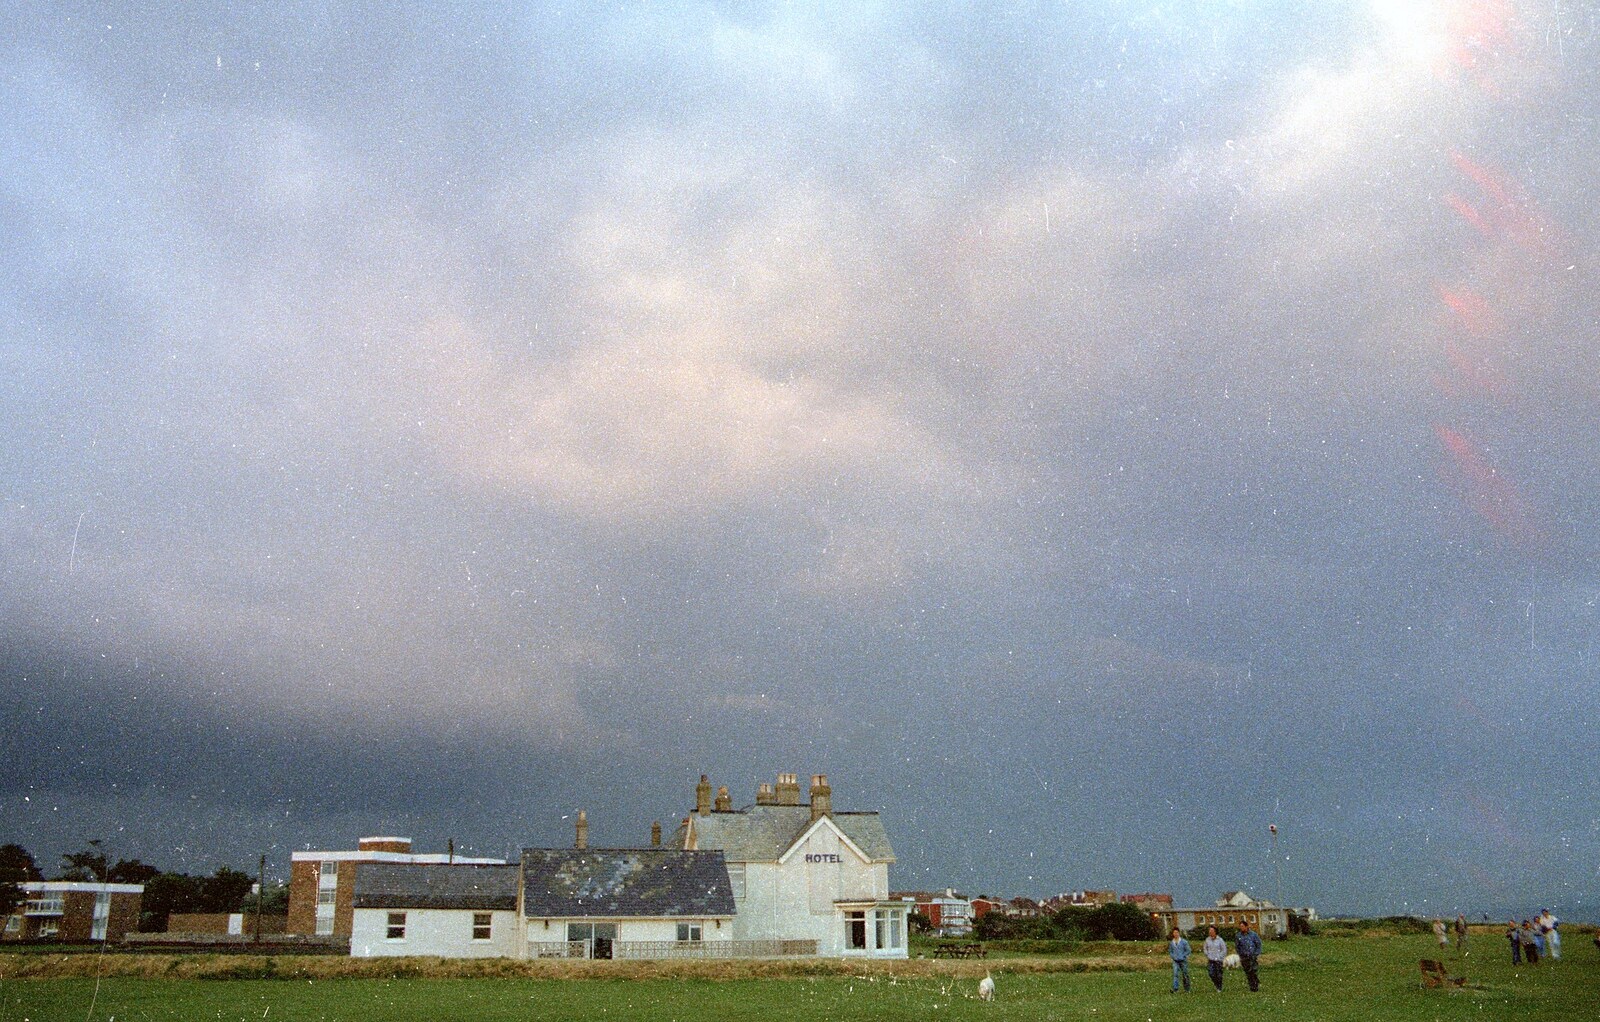 Dark skies over Barton Golf Course from A Ford Cottage Miscellany, Barton on Sea, Hampshire - 7th July 1986